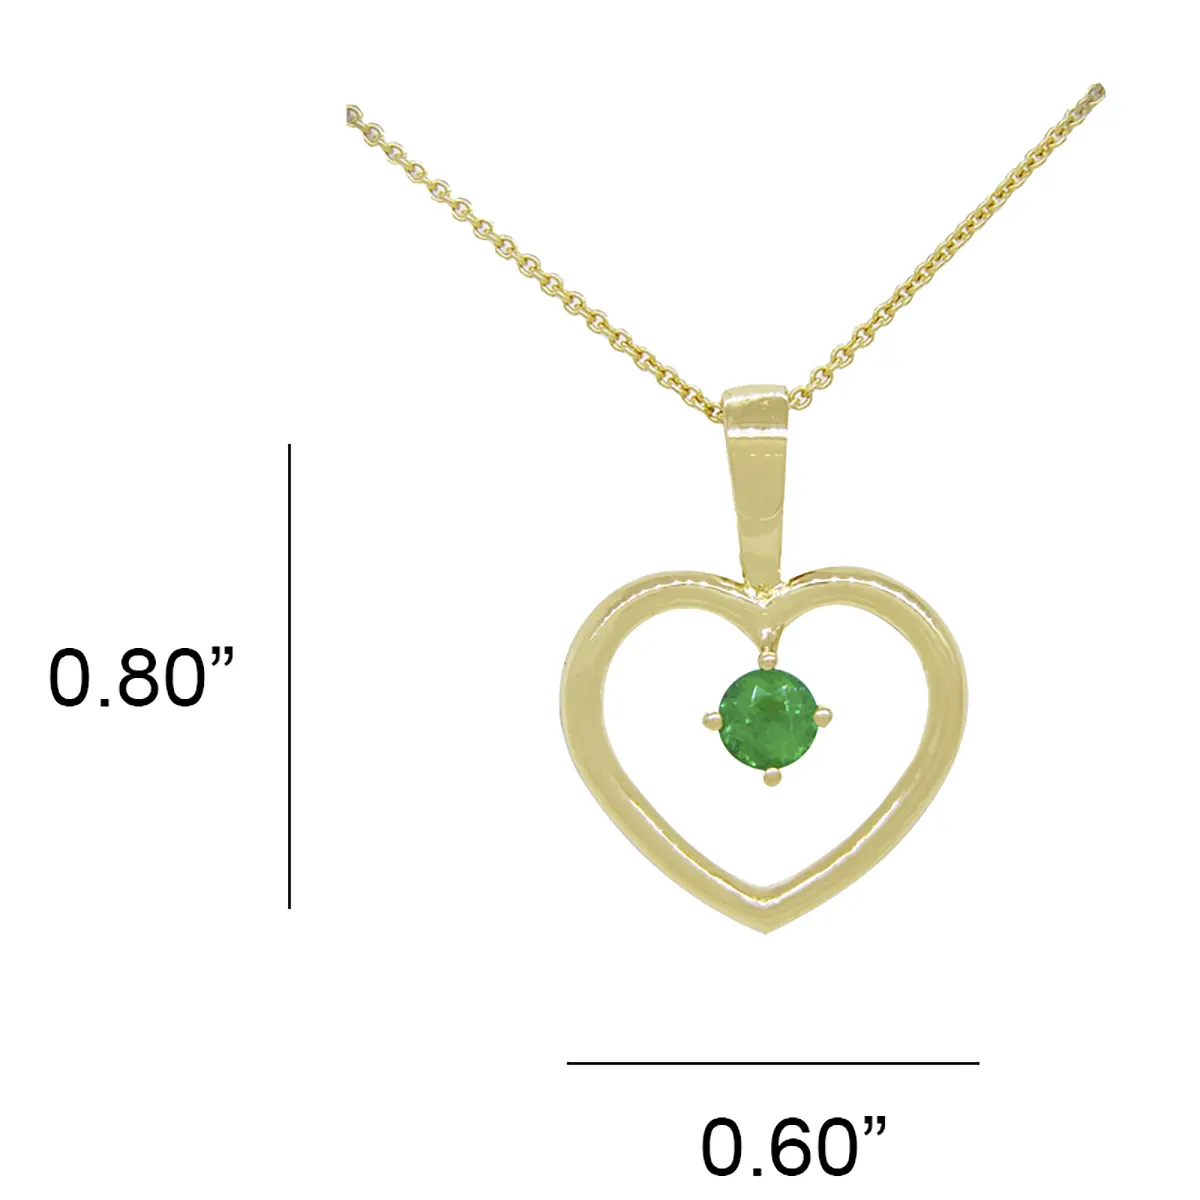 This pendant's dimensions are 0.80 inches high, by the top of the bail, by 0.60 inches wide. It is a medium size pendant easy to wear with any outfit